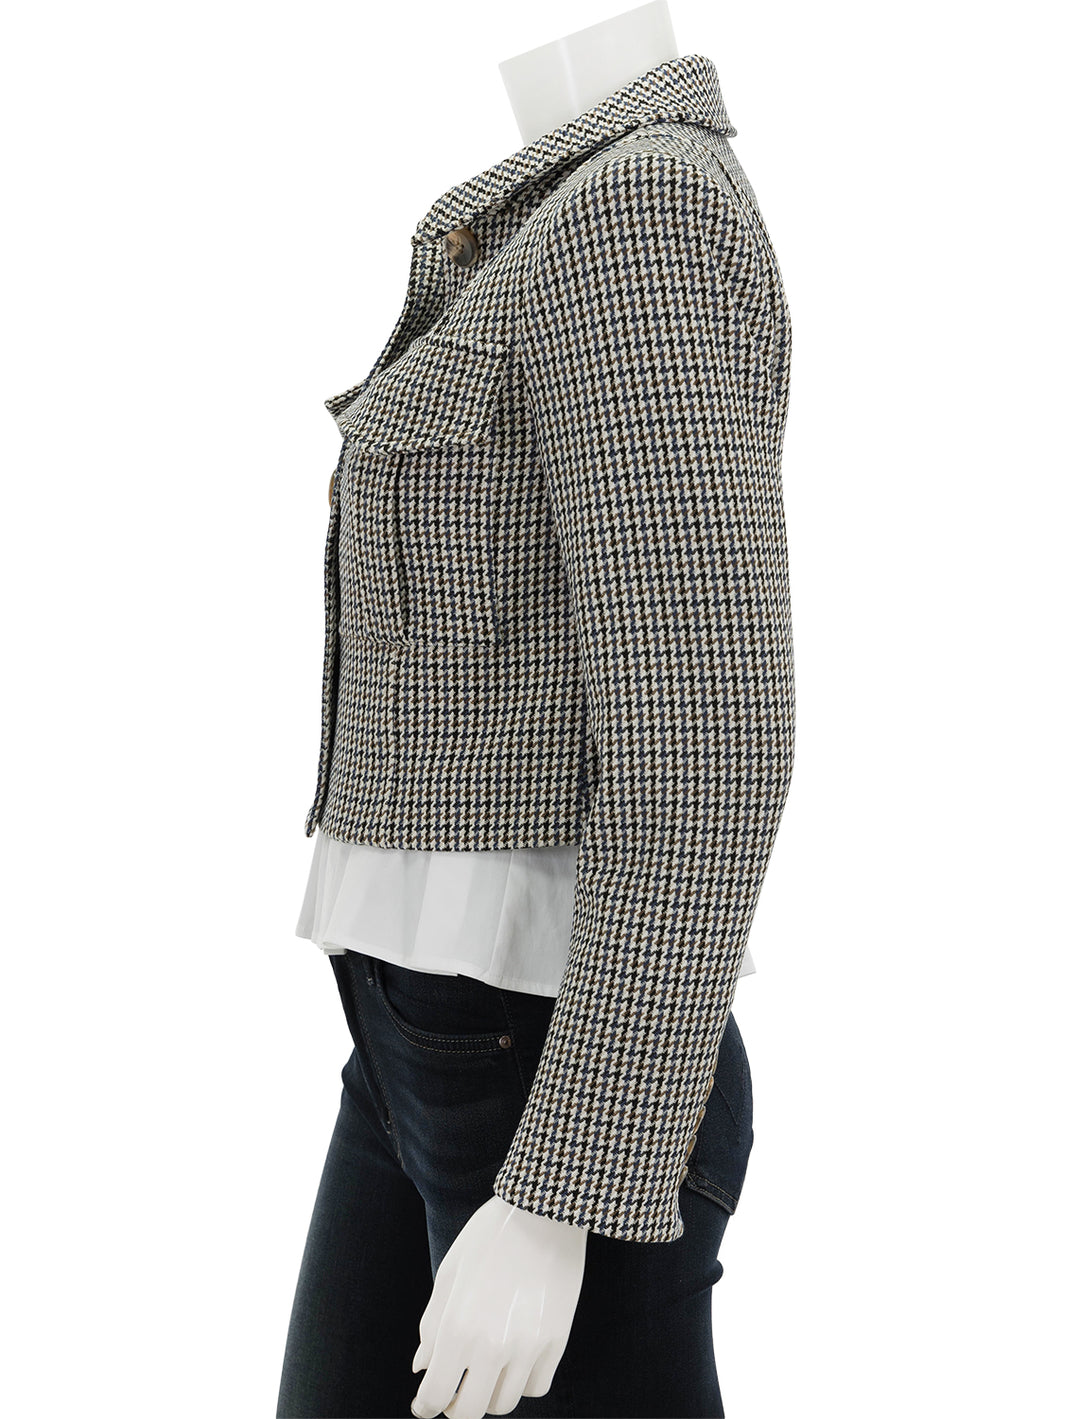 Side view of Veronica Beard's fulham jacket in multi check.